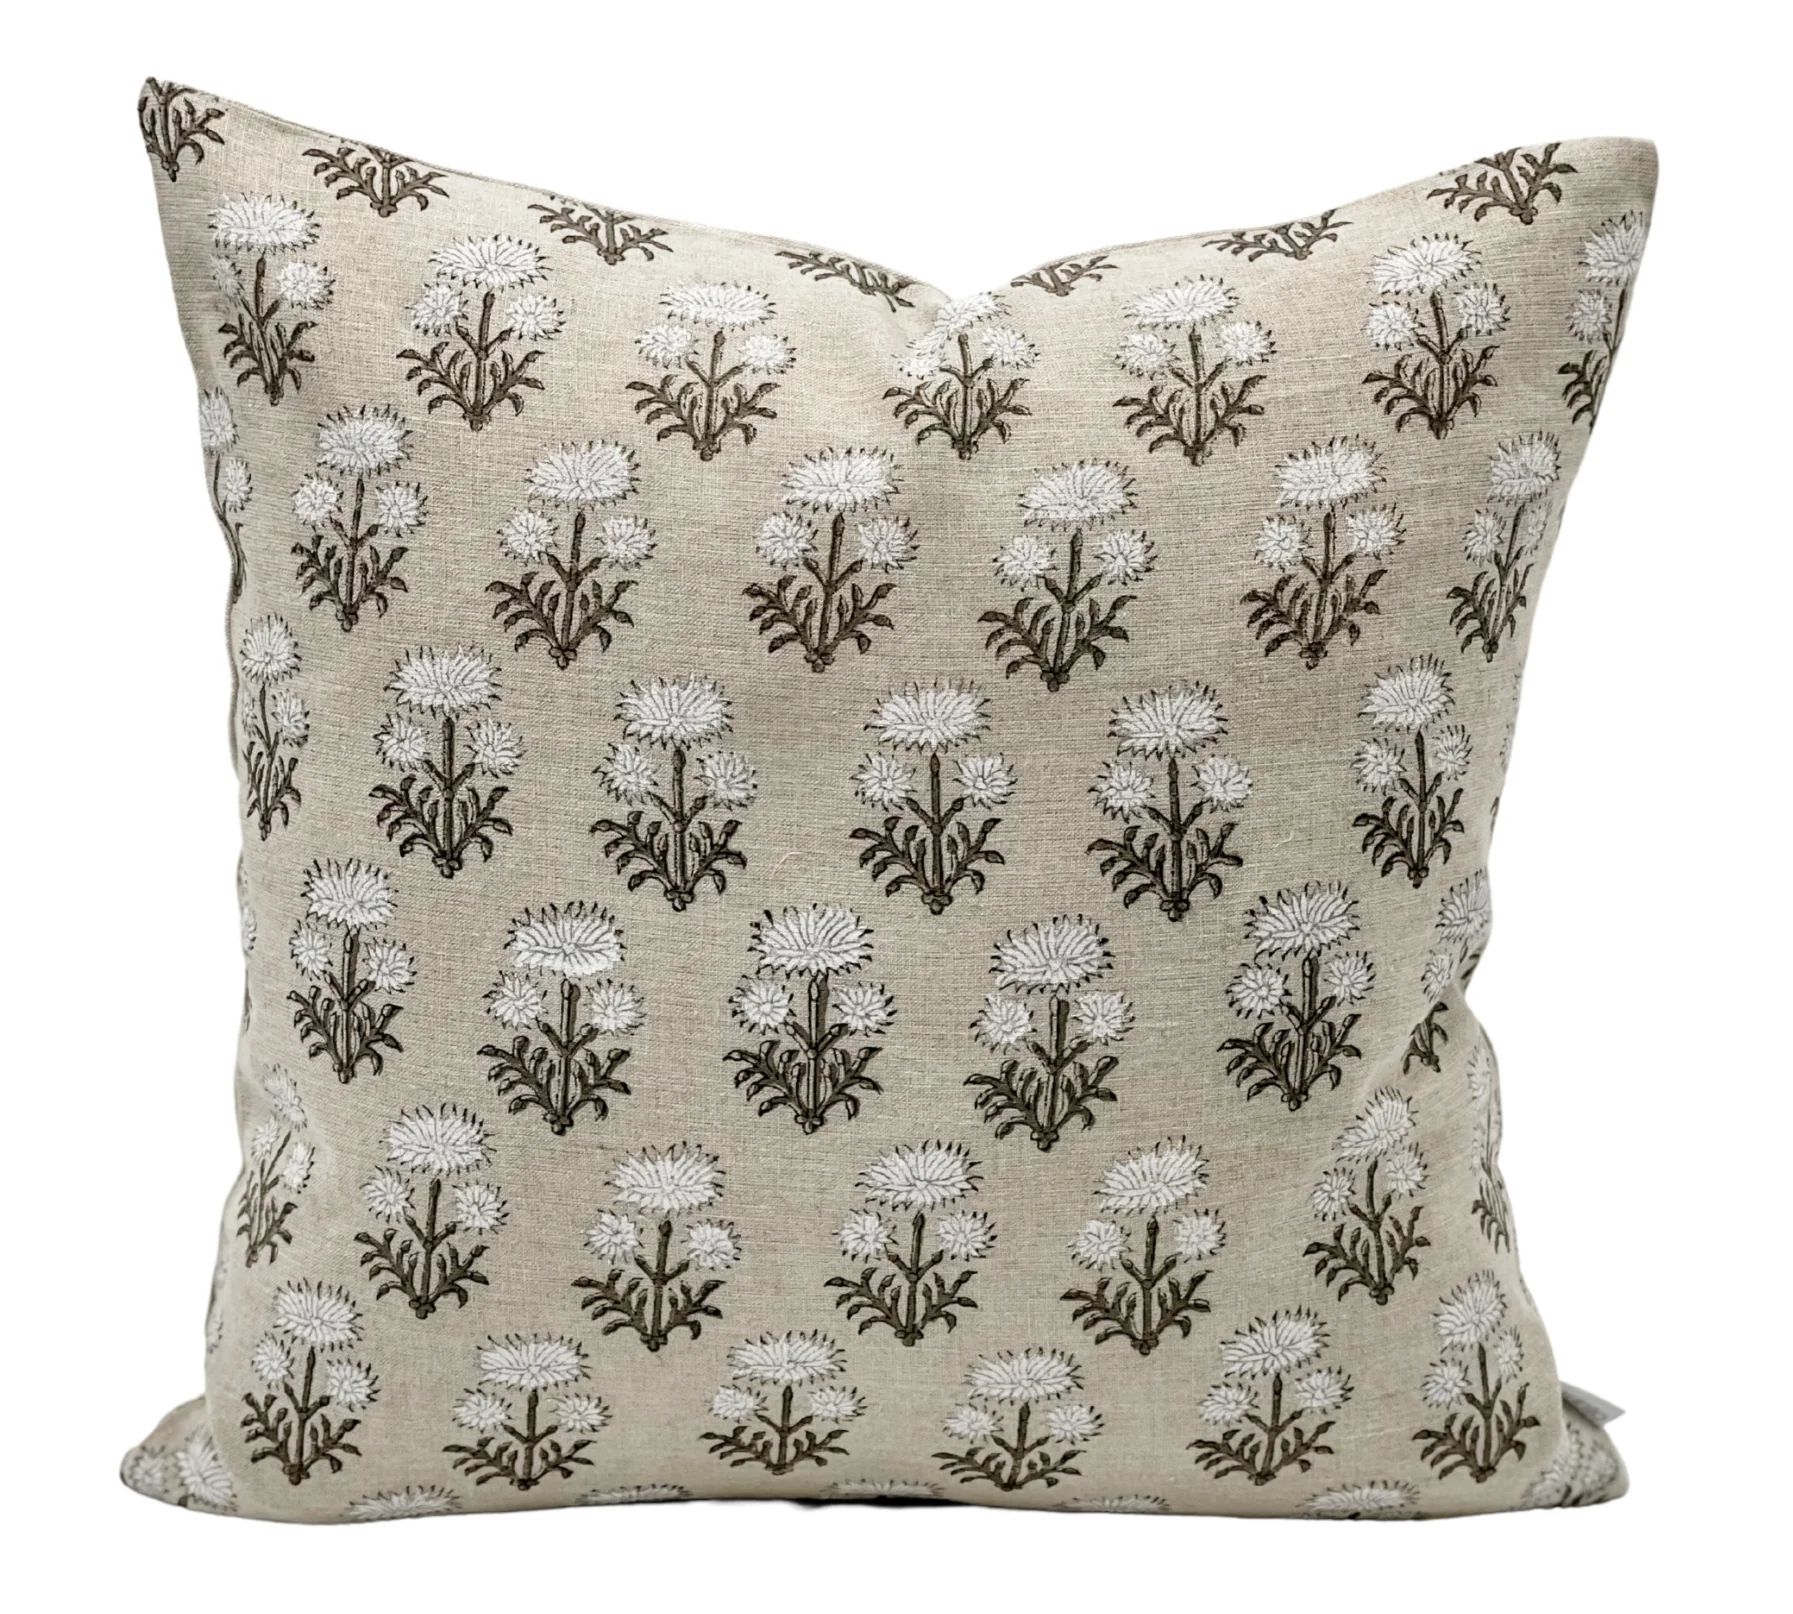 Ojai in Beige/Chalk Pillow Cover | Krinto